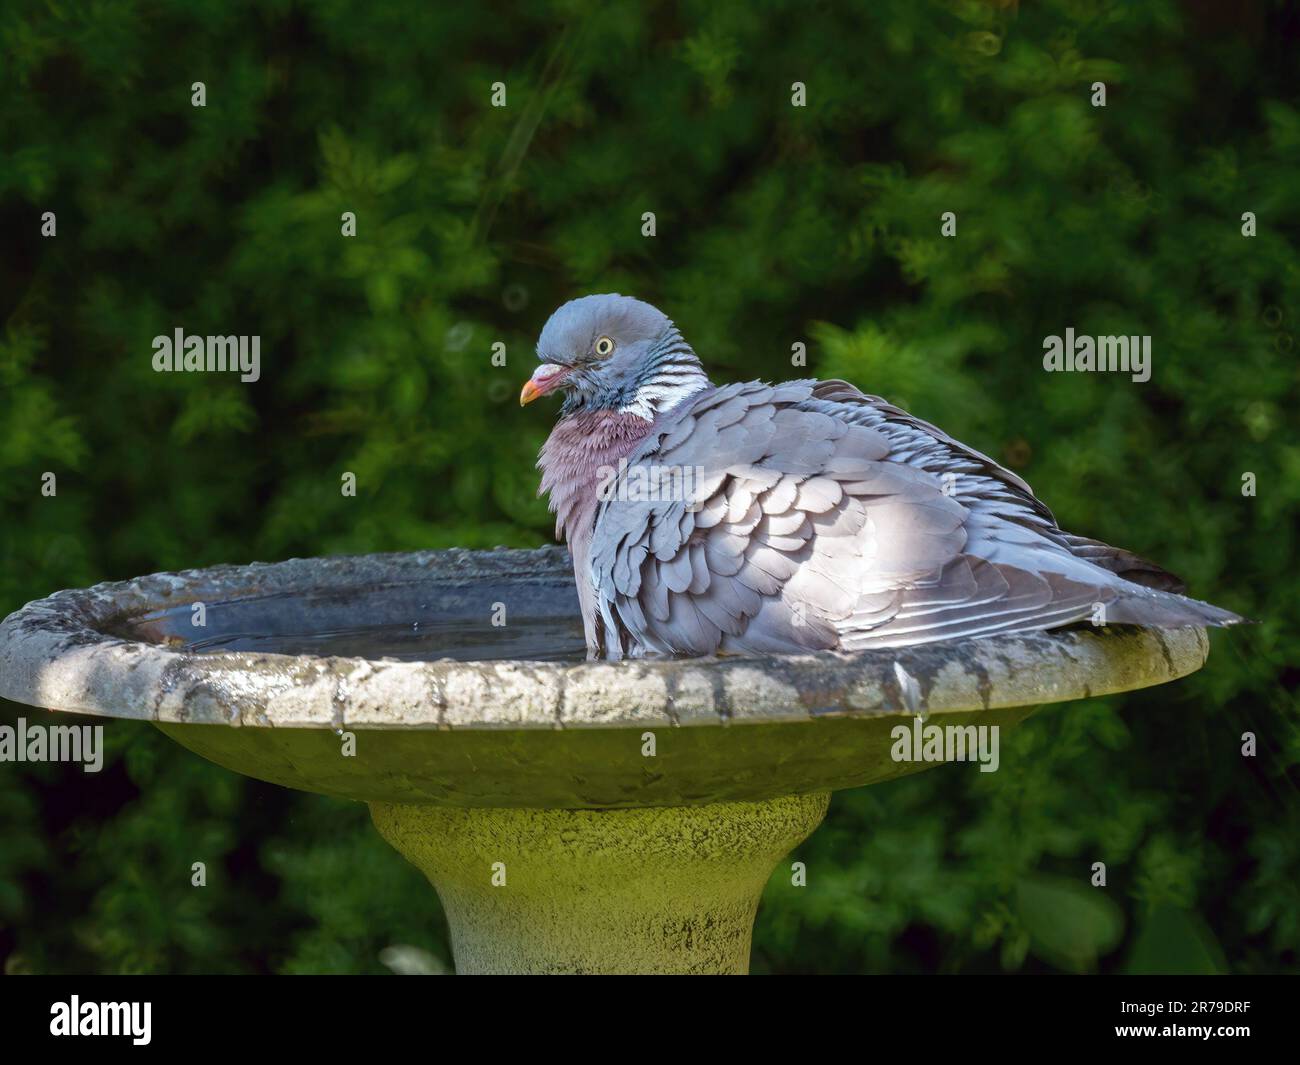 Large adult common wood pigeon (Columba palumbus) with ruffled feathers sitting in water in a garden bird bath, Leicestershire, England, UK Stock Photo